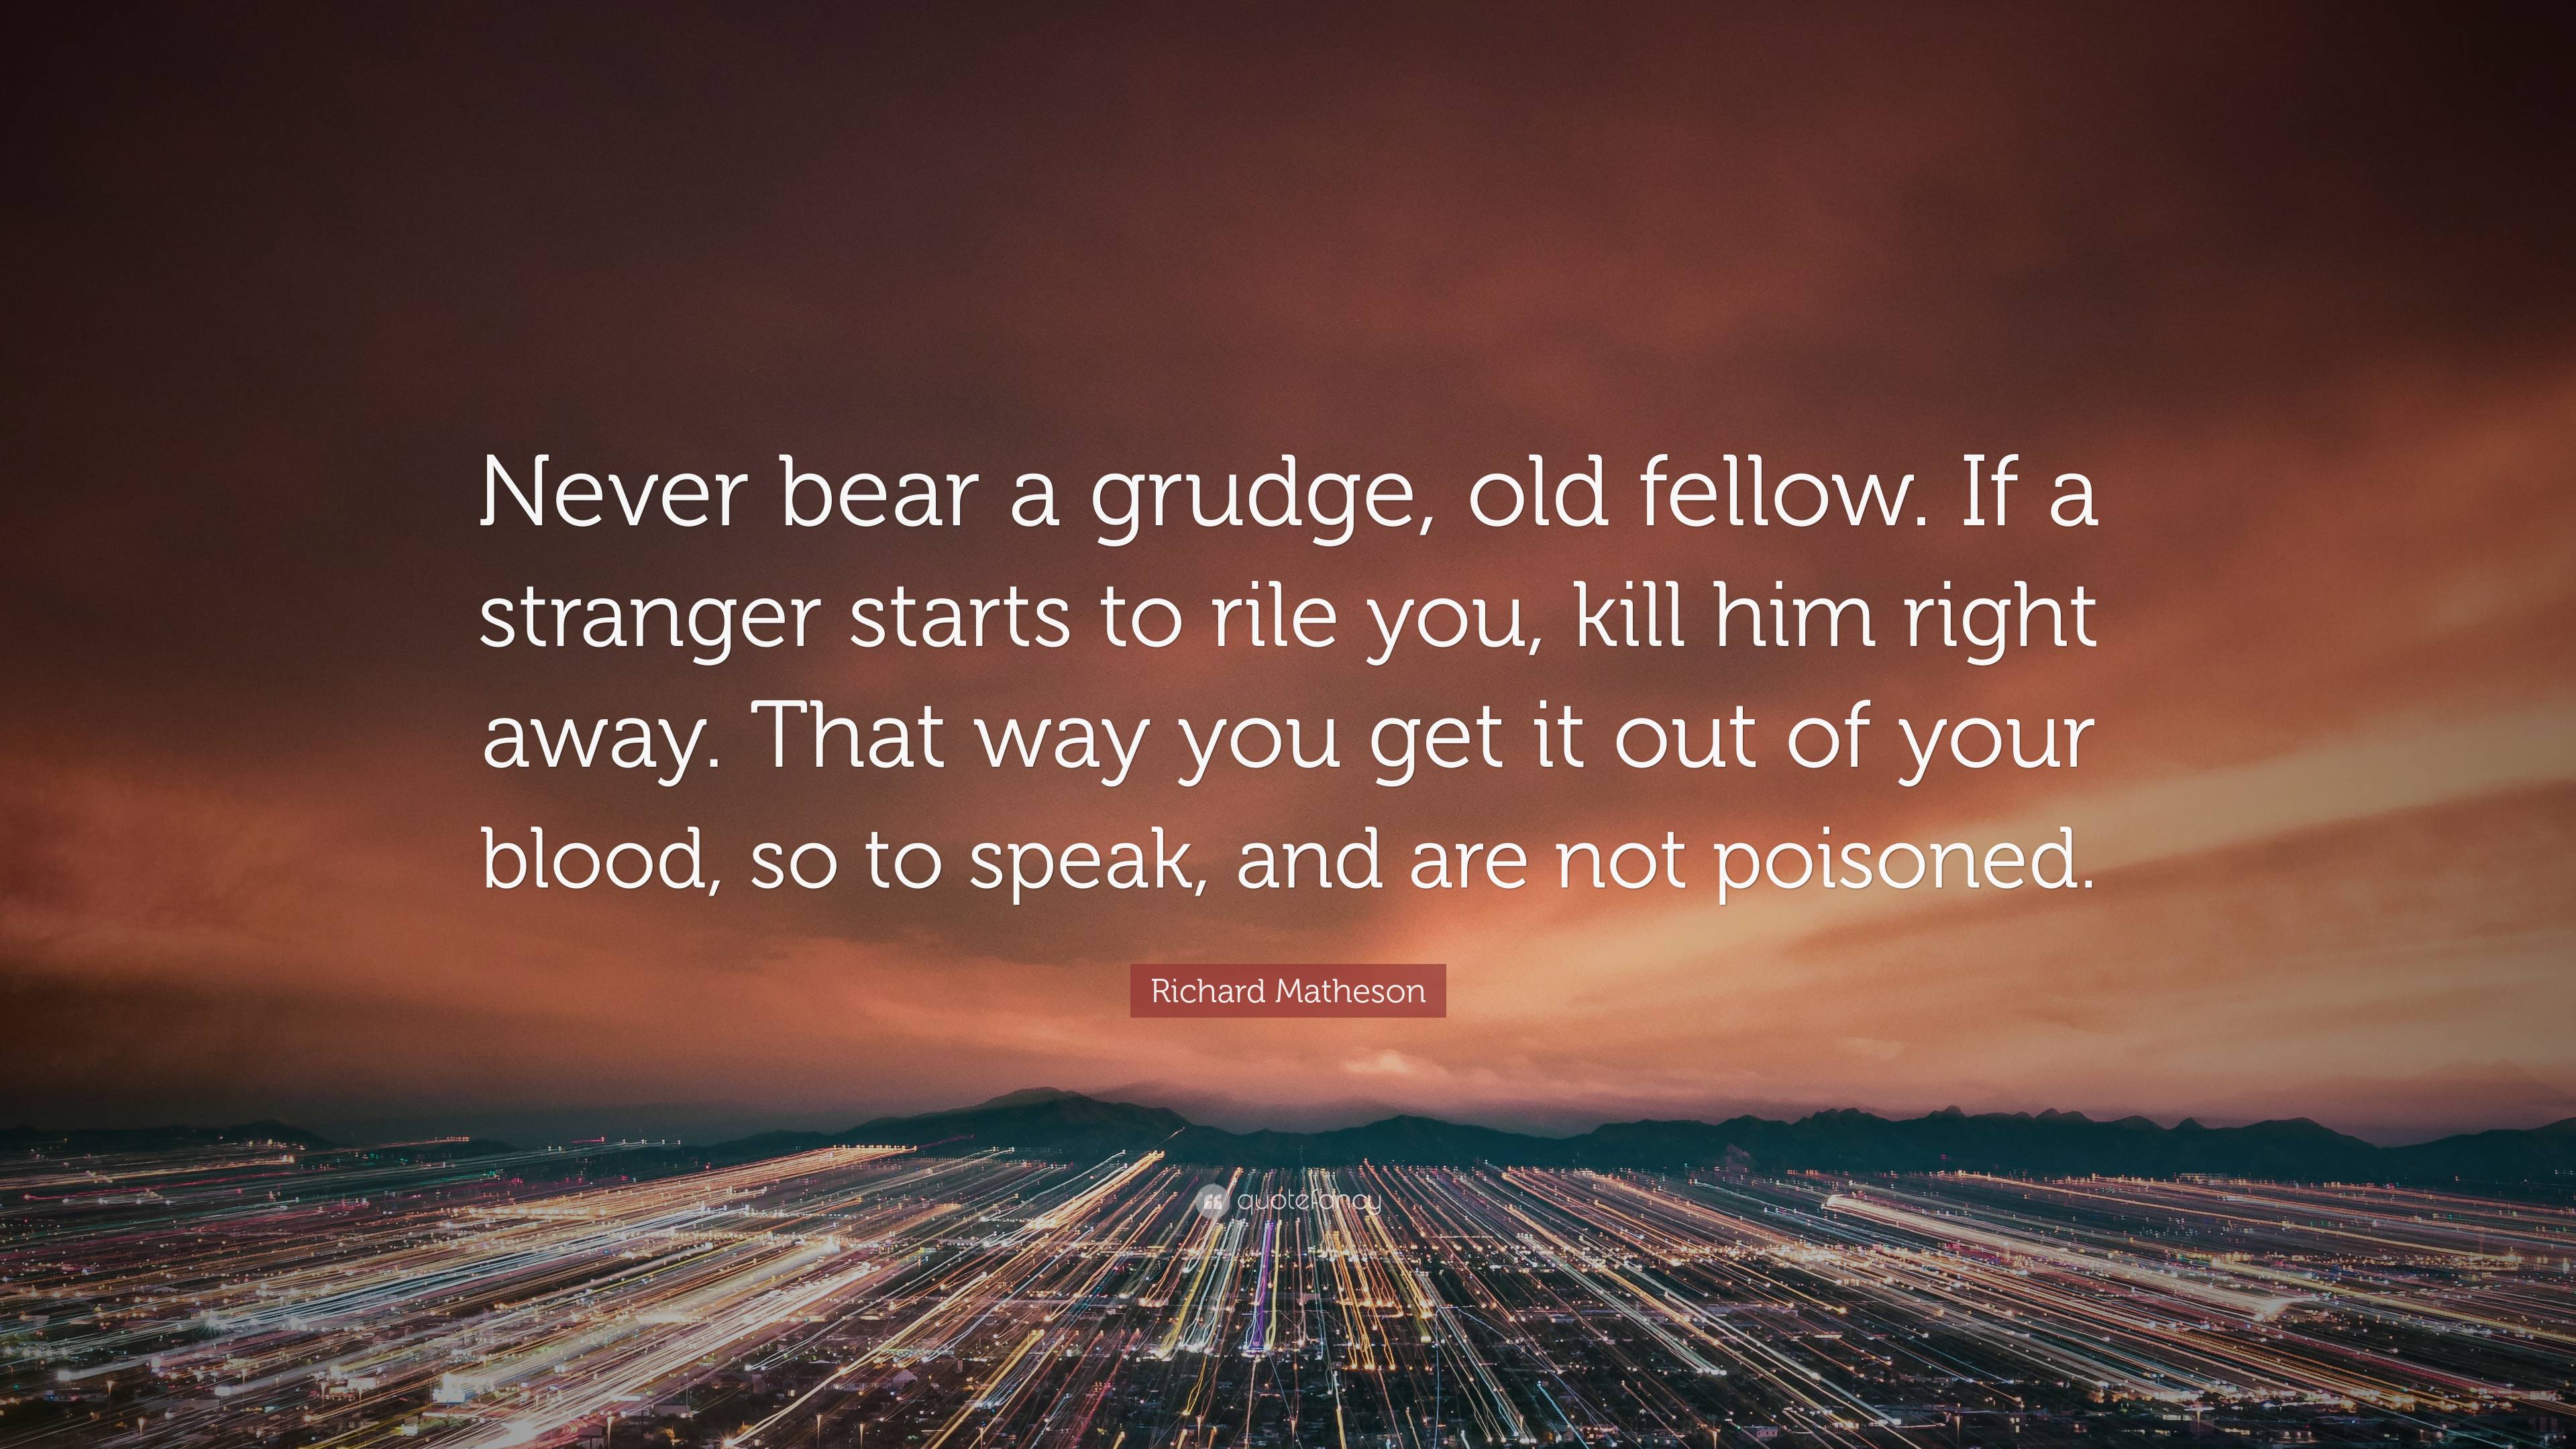 Richard Matheson Quote: “Never bear a grudge, old fellow. If a stranger ...